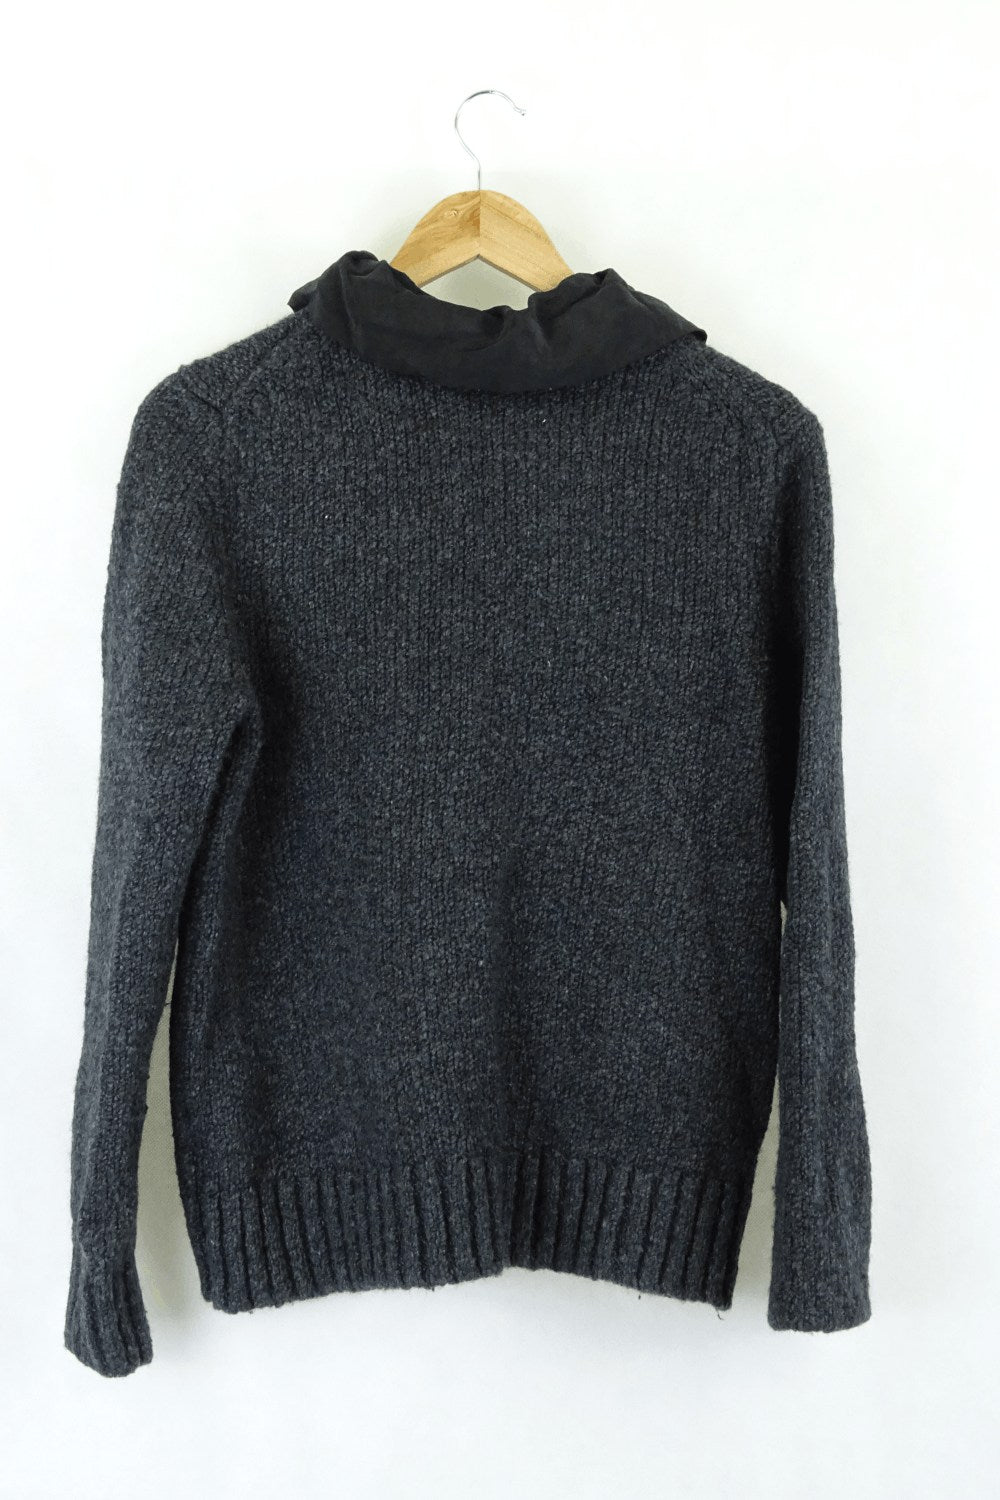 Cos Grey Knitted Jumper M